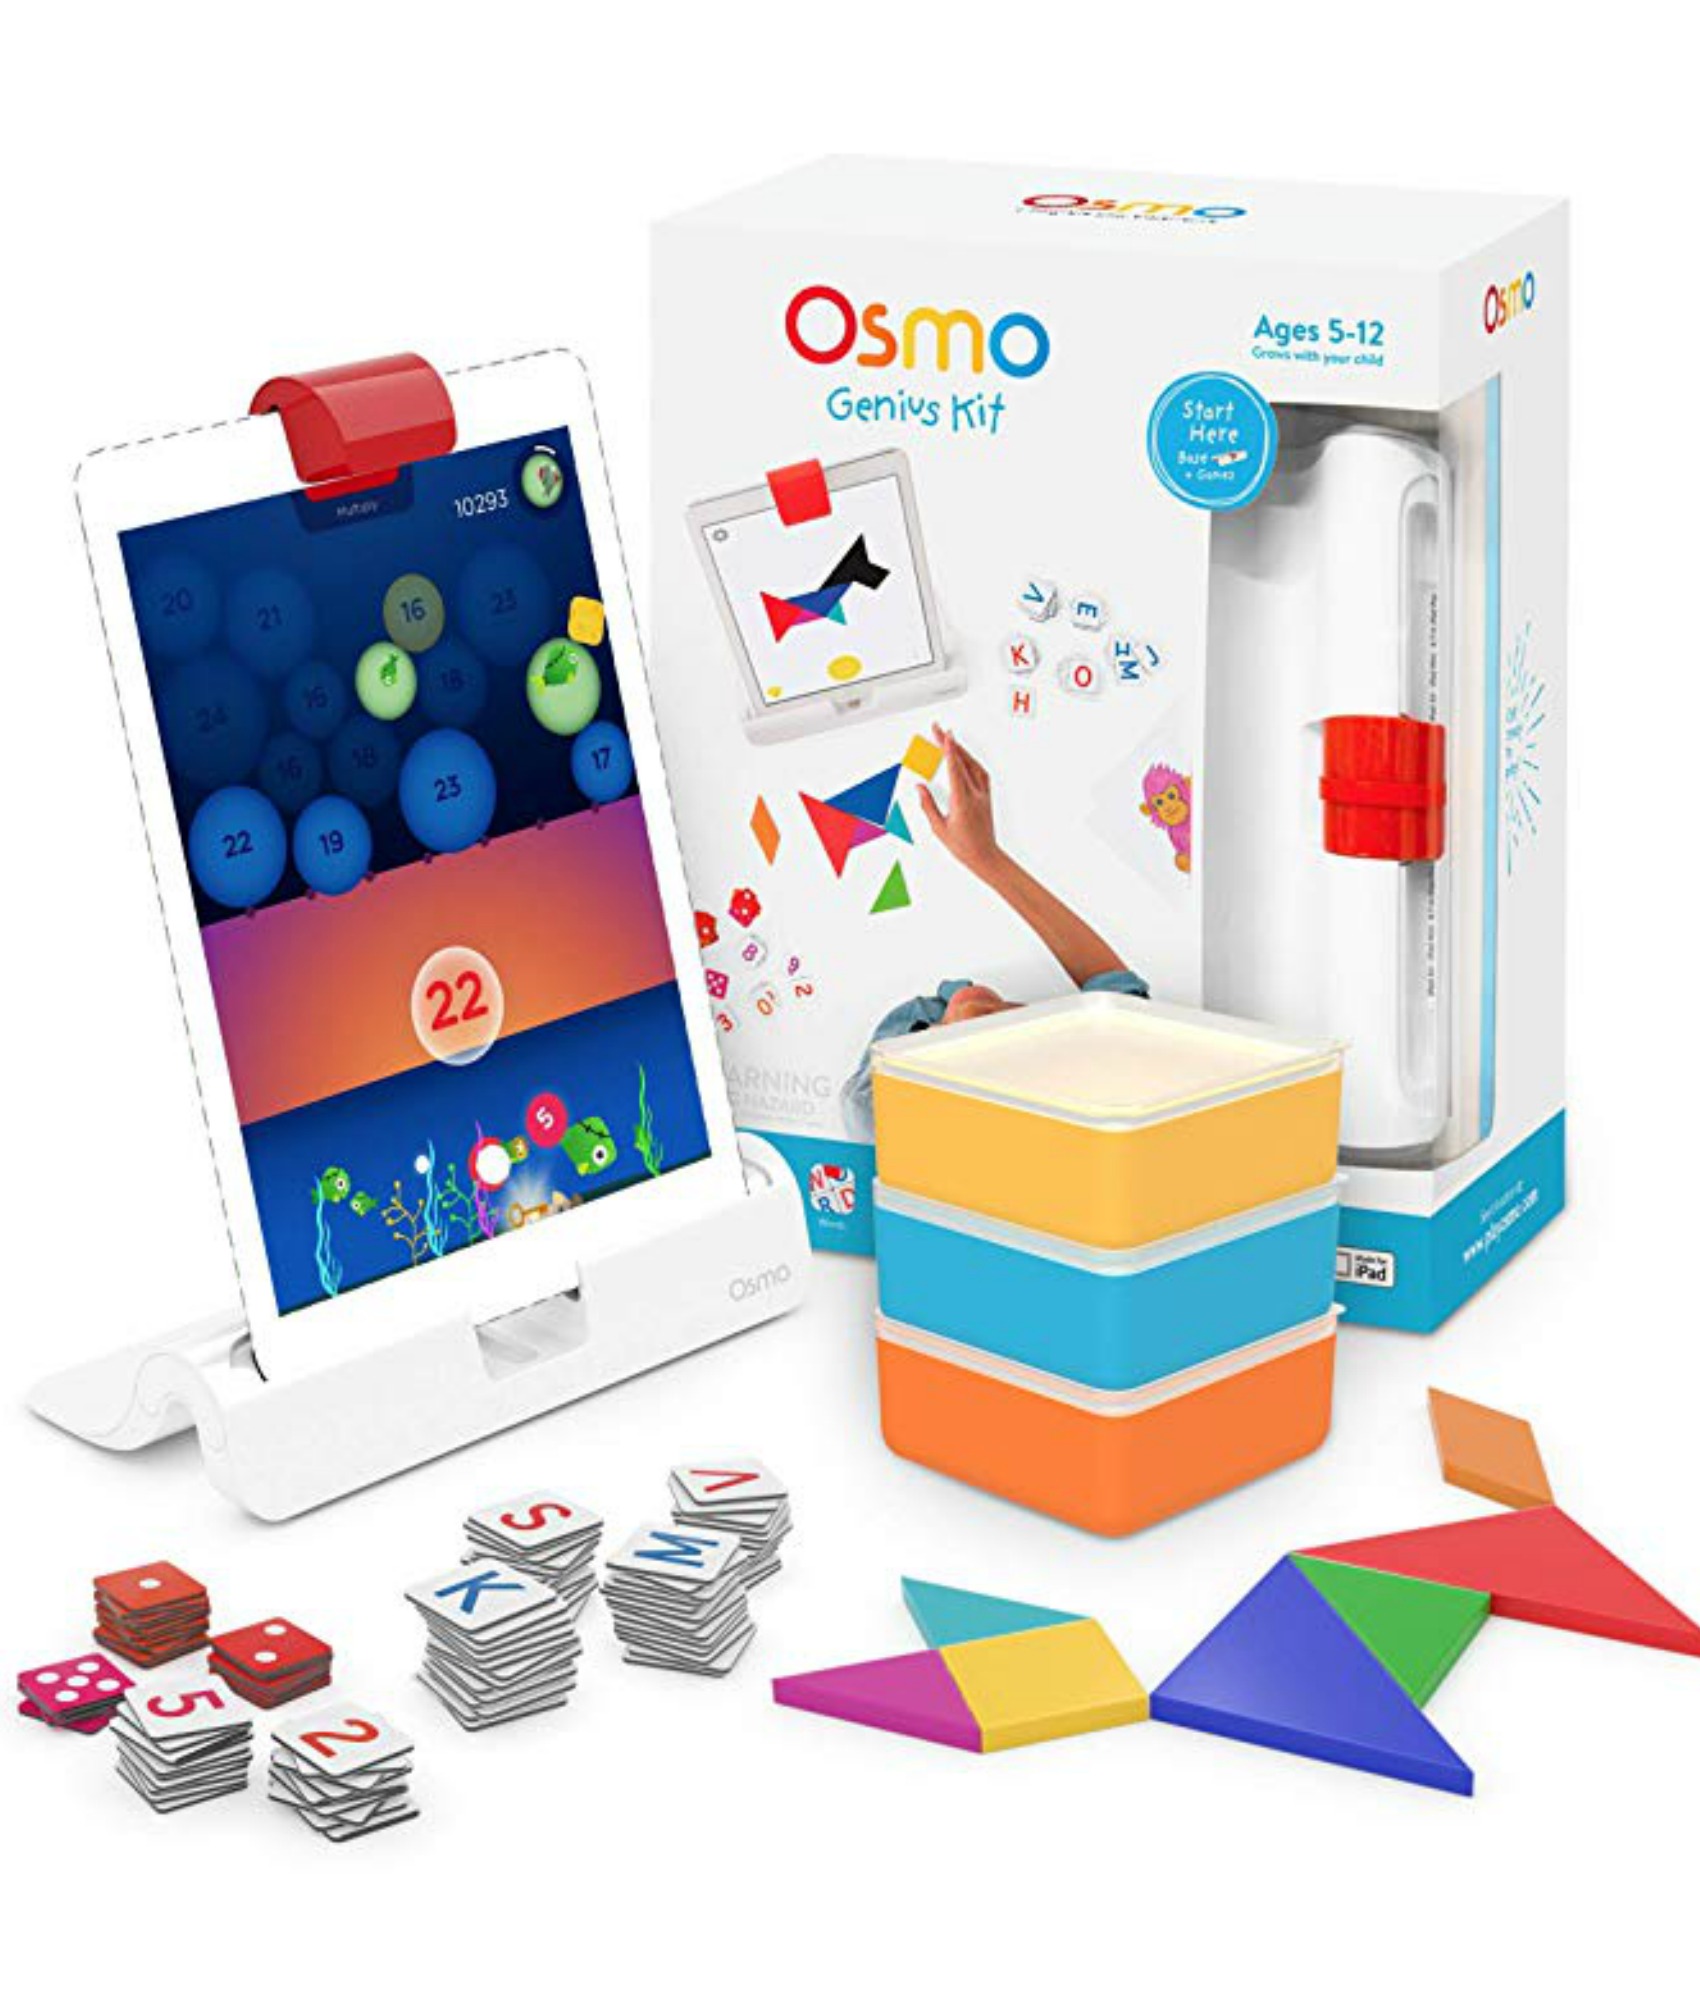 OSMO Genius Kit | The Coolest Birthday Gifts for 5 year olds